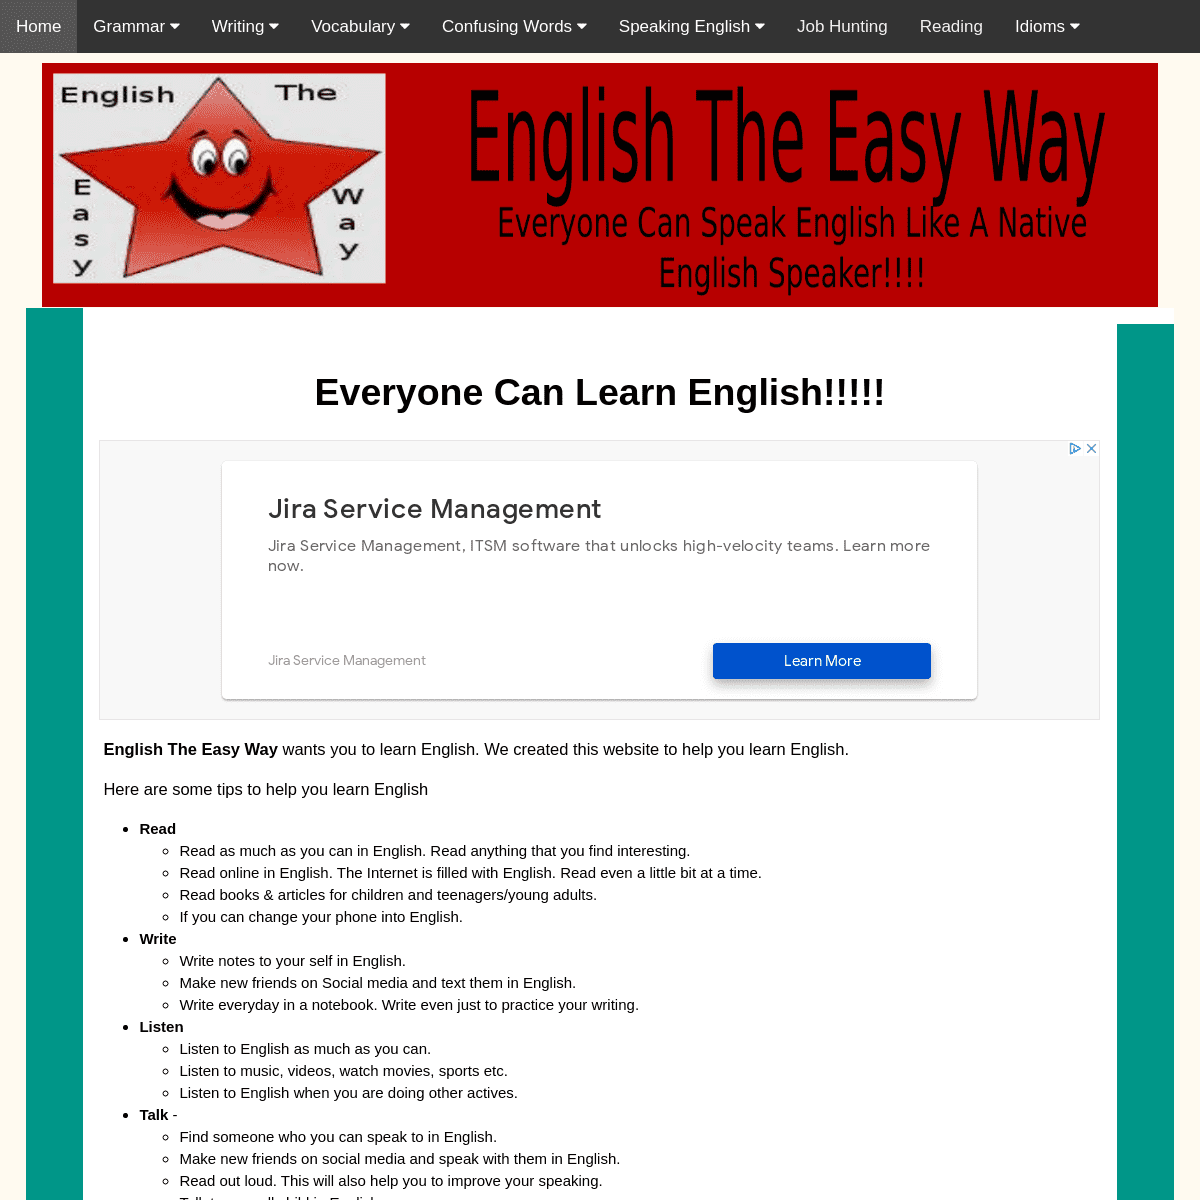 A complete backup of https://english-the-easy-way.com